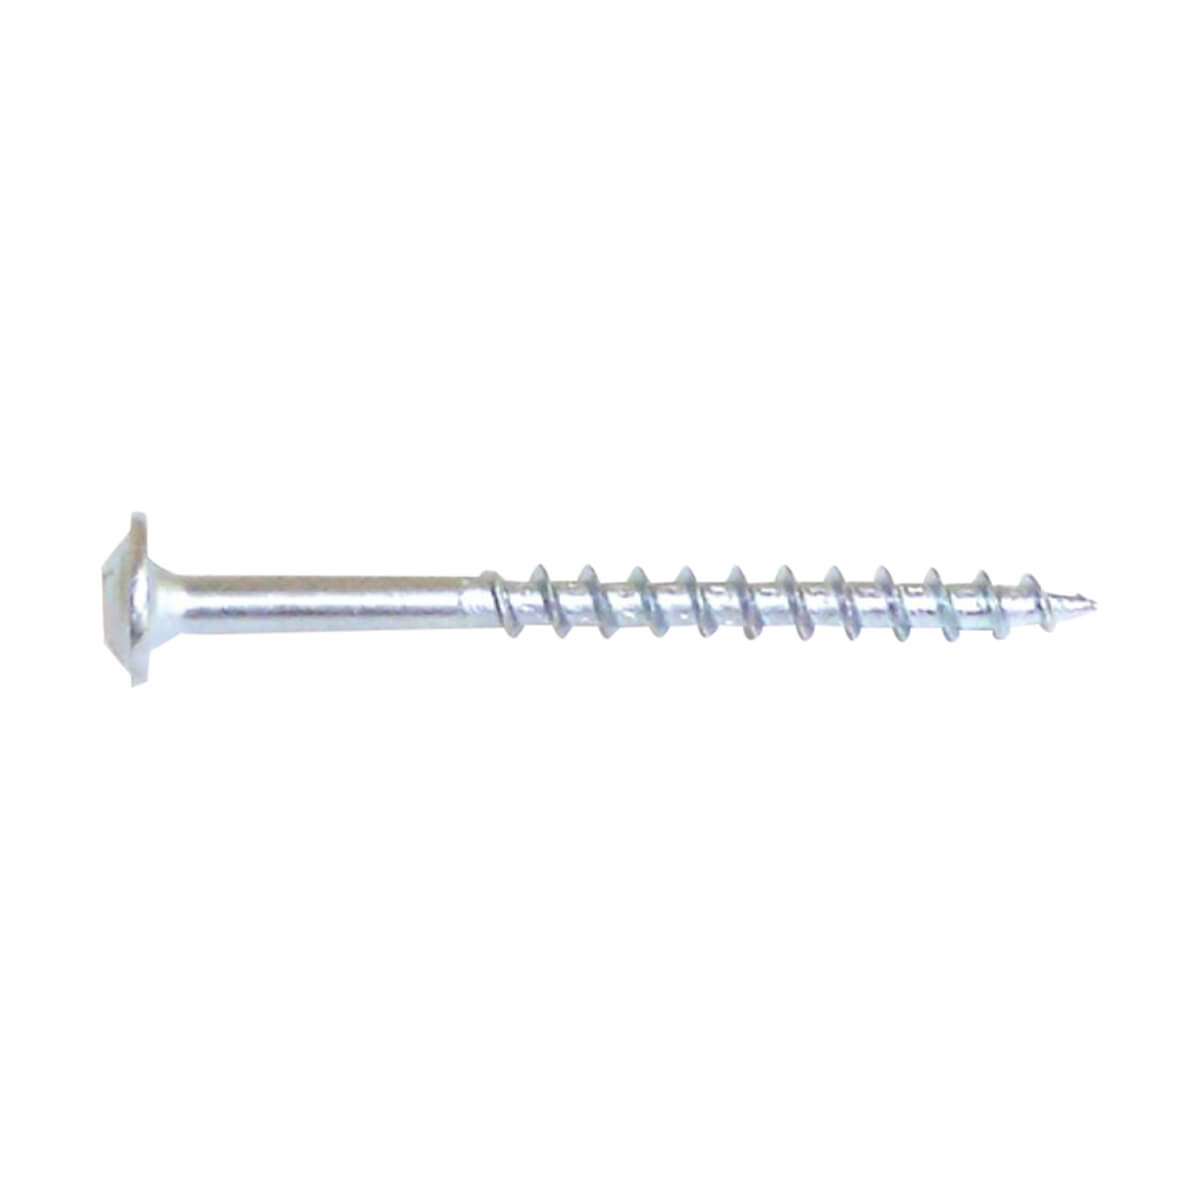 Pan-Head with Washer Pocket Screws - #8 X 1-1/8-in - 100 / Box